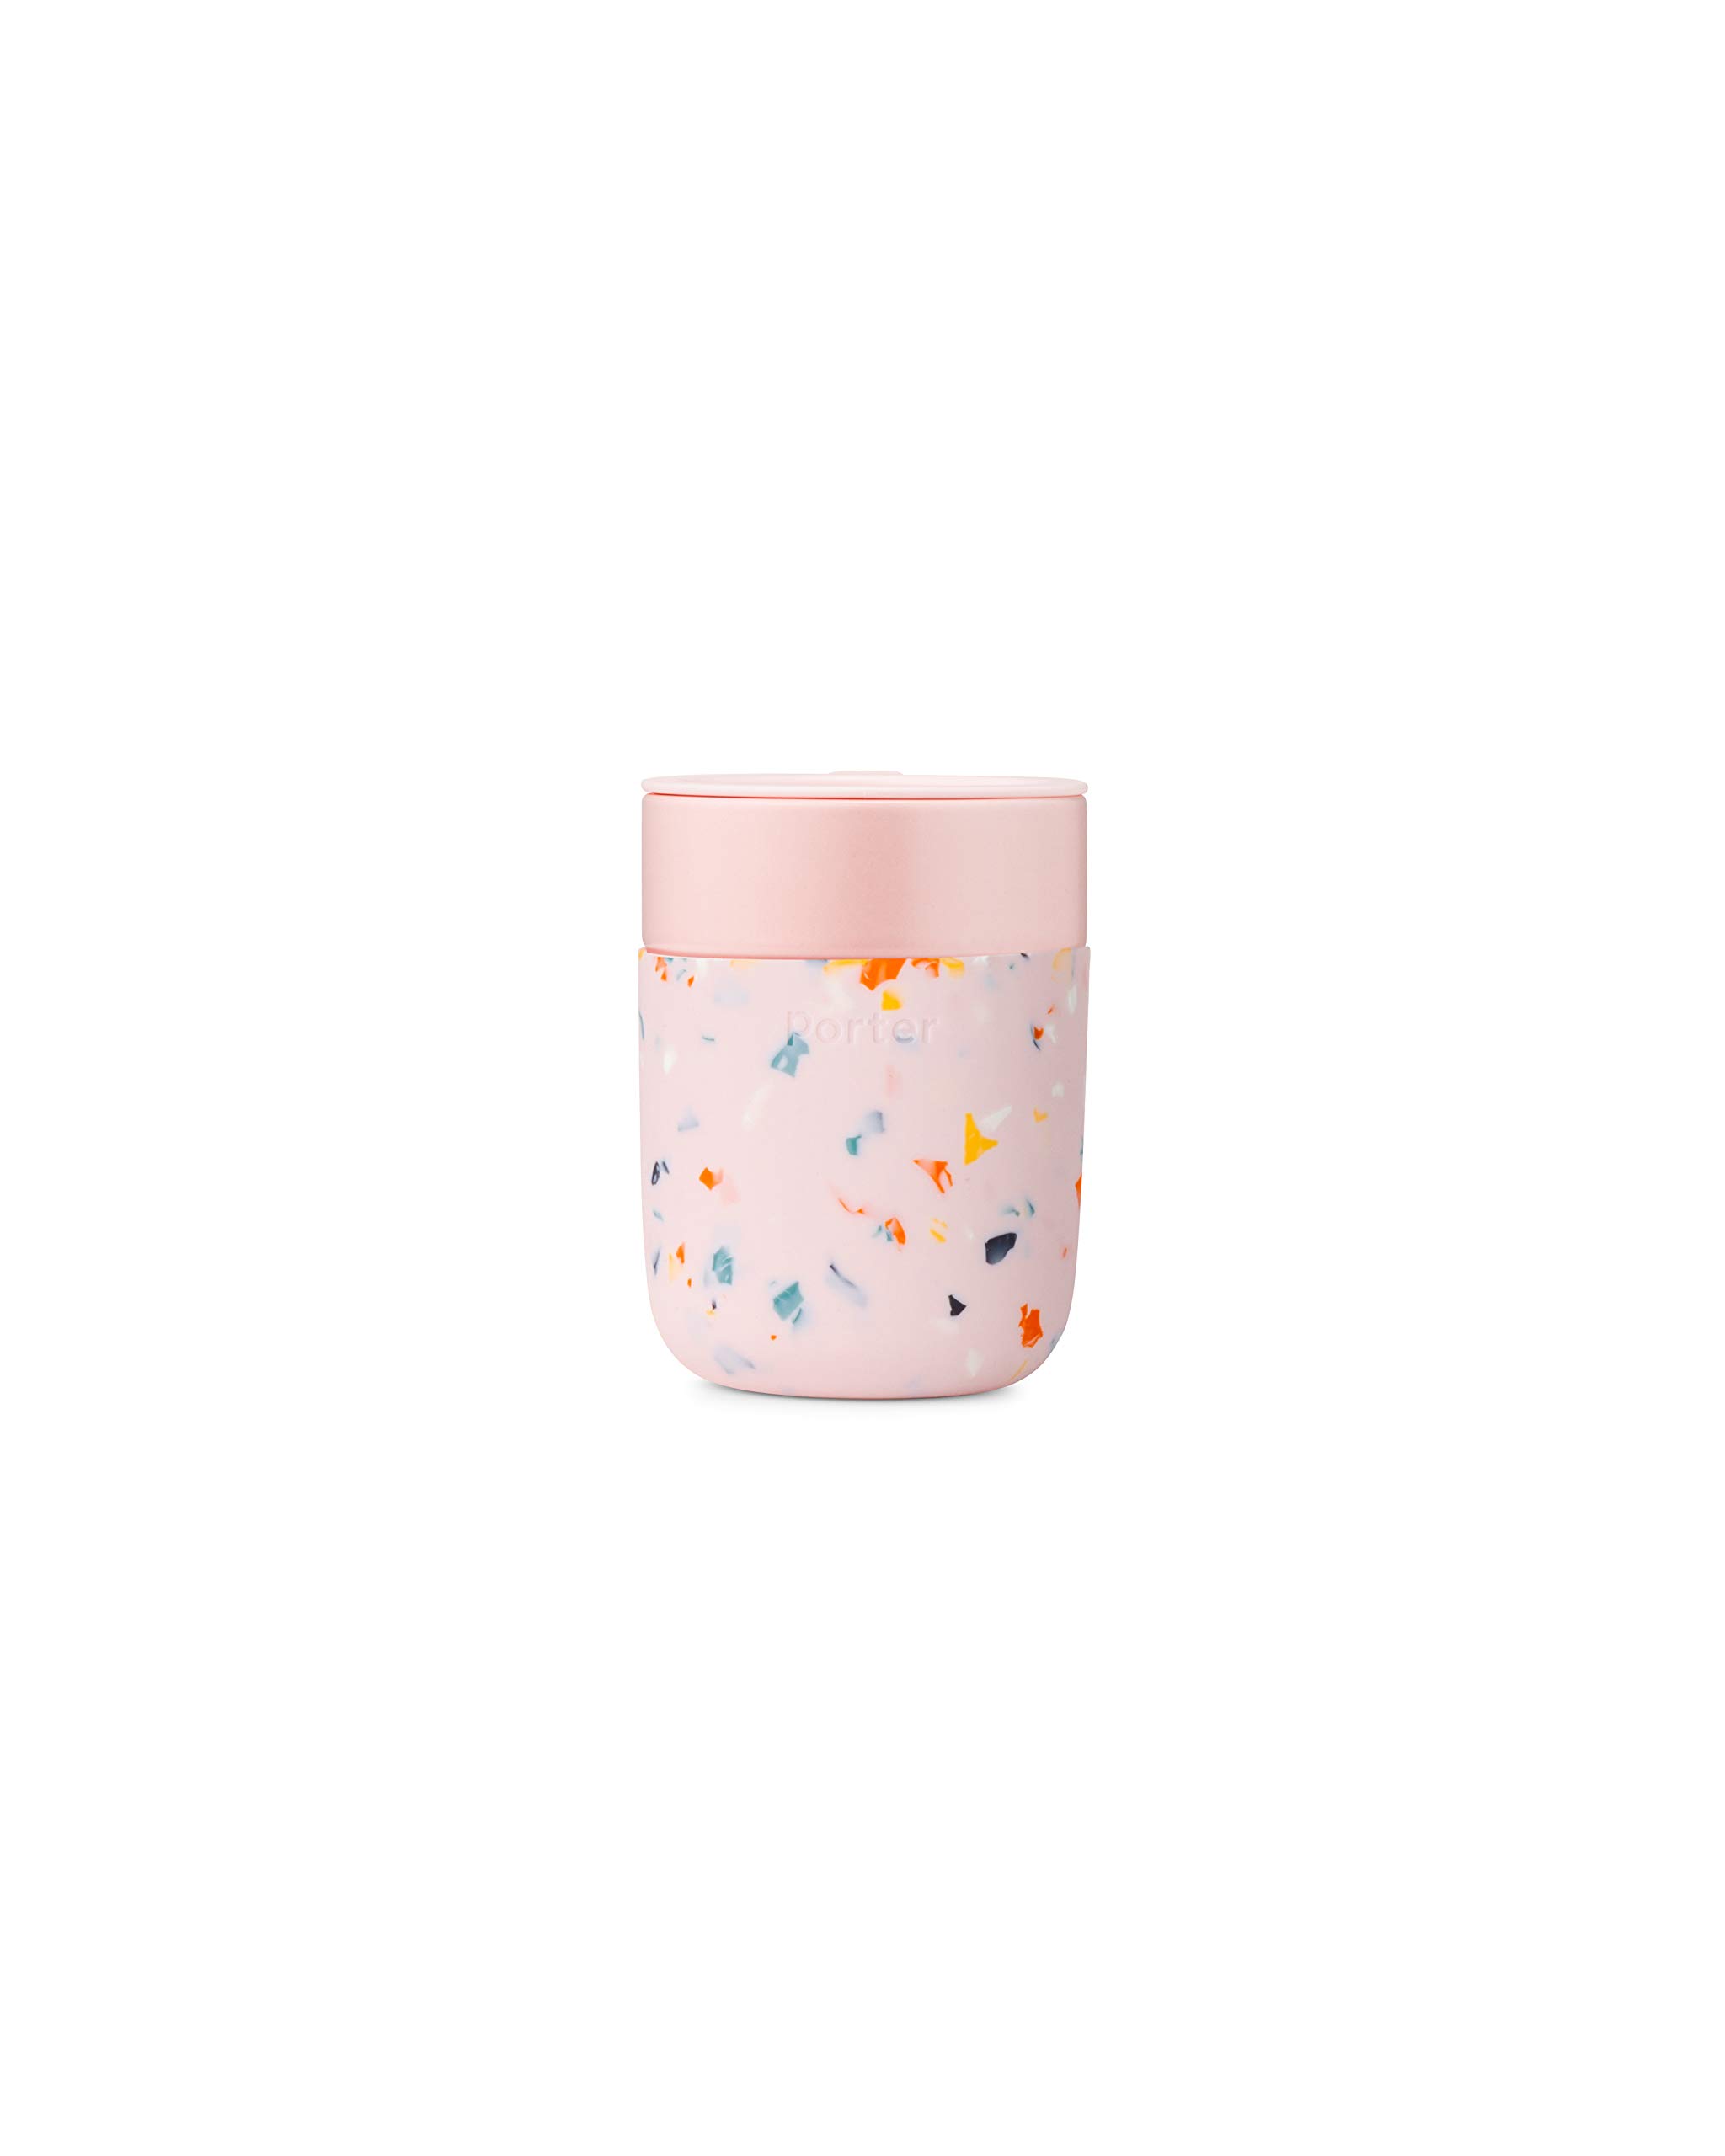 W&P Porter Travel Coffee Mug with Protective Silicone Sleeve, 16 Ounce Terrazzo Blush, Reusable Cup for Coffee or Tea, Portable Ceramic Mug with BPA-Free Press-Fit Lid, Dishwasher Safe, On-the-Go